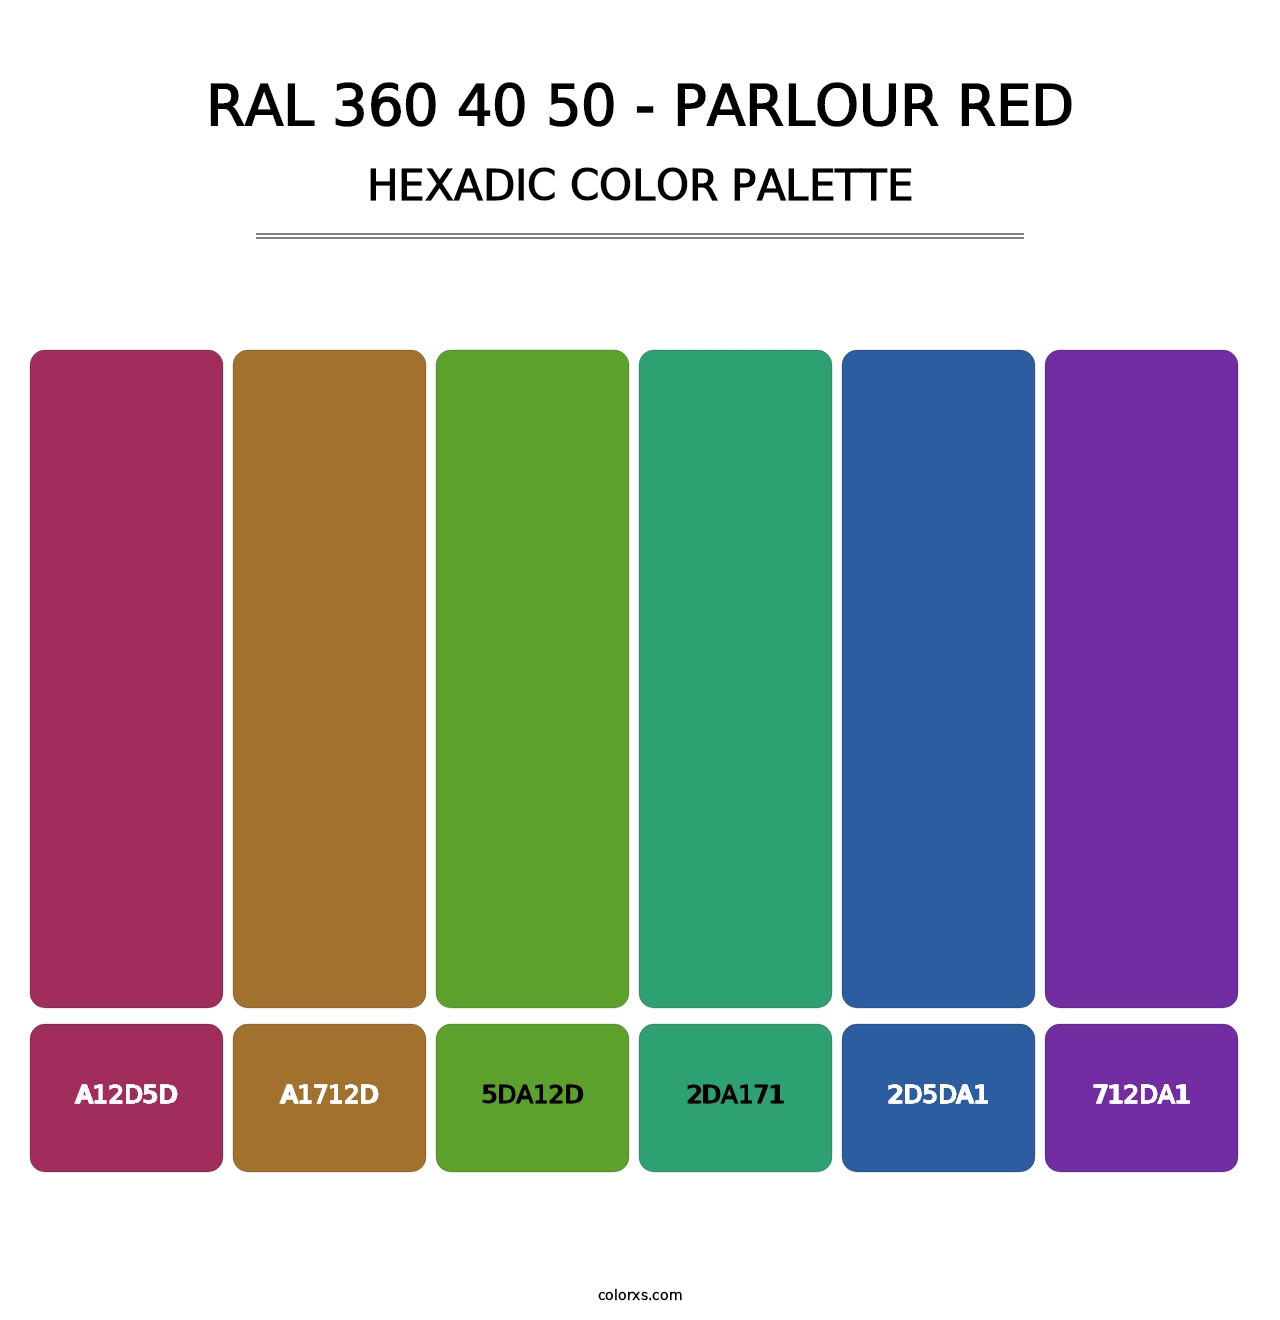 RAL 360 40 50 - Parlour Red - Hexadic Color Palette